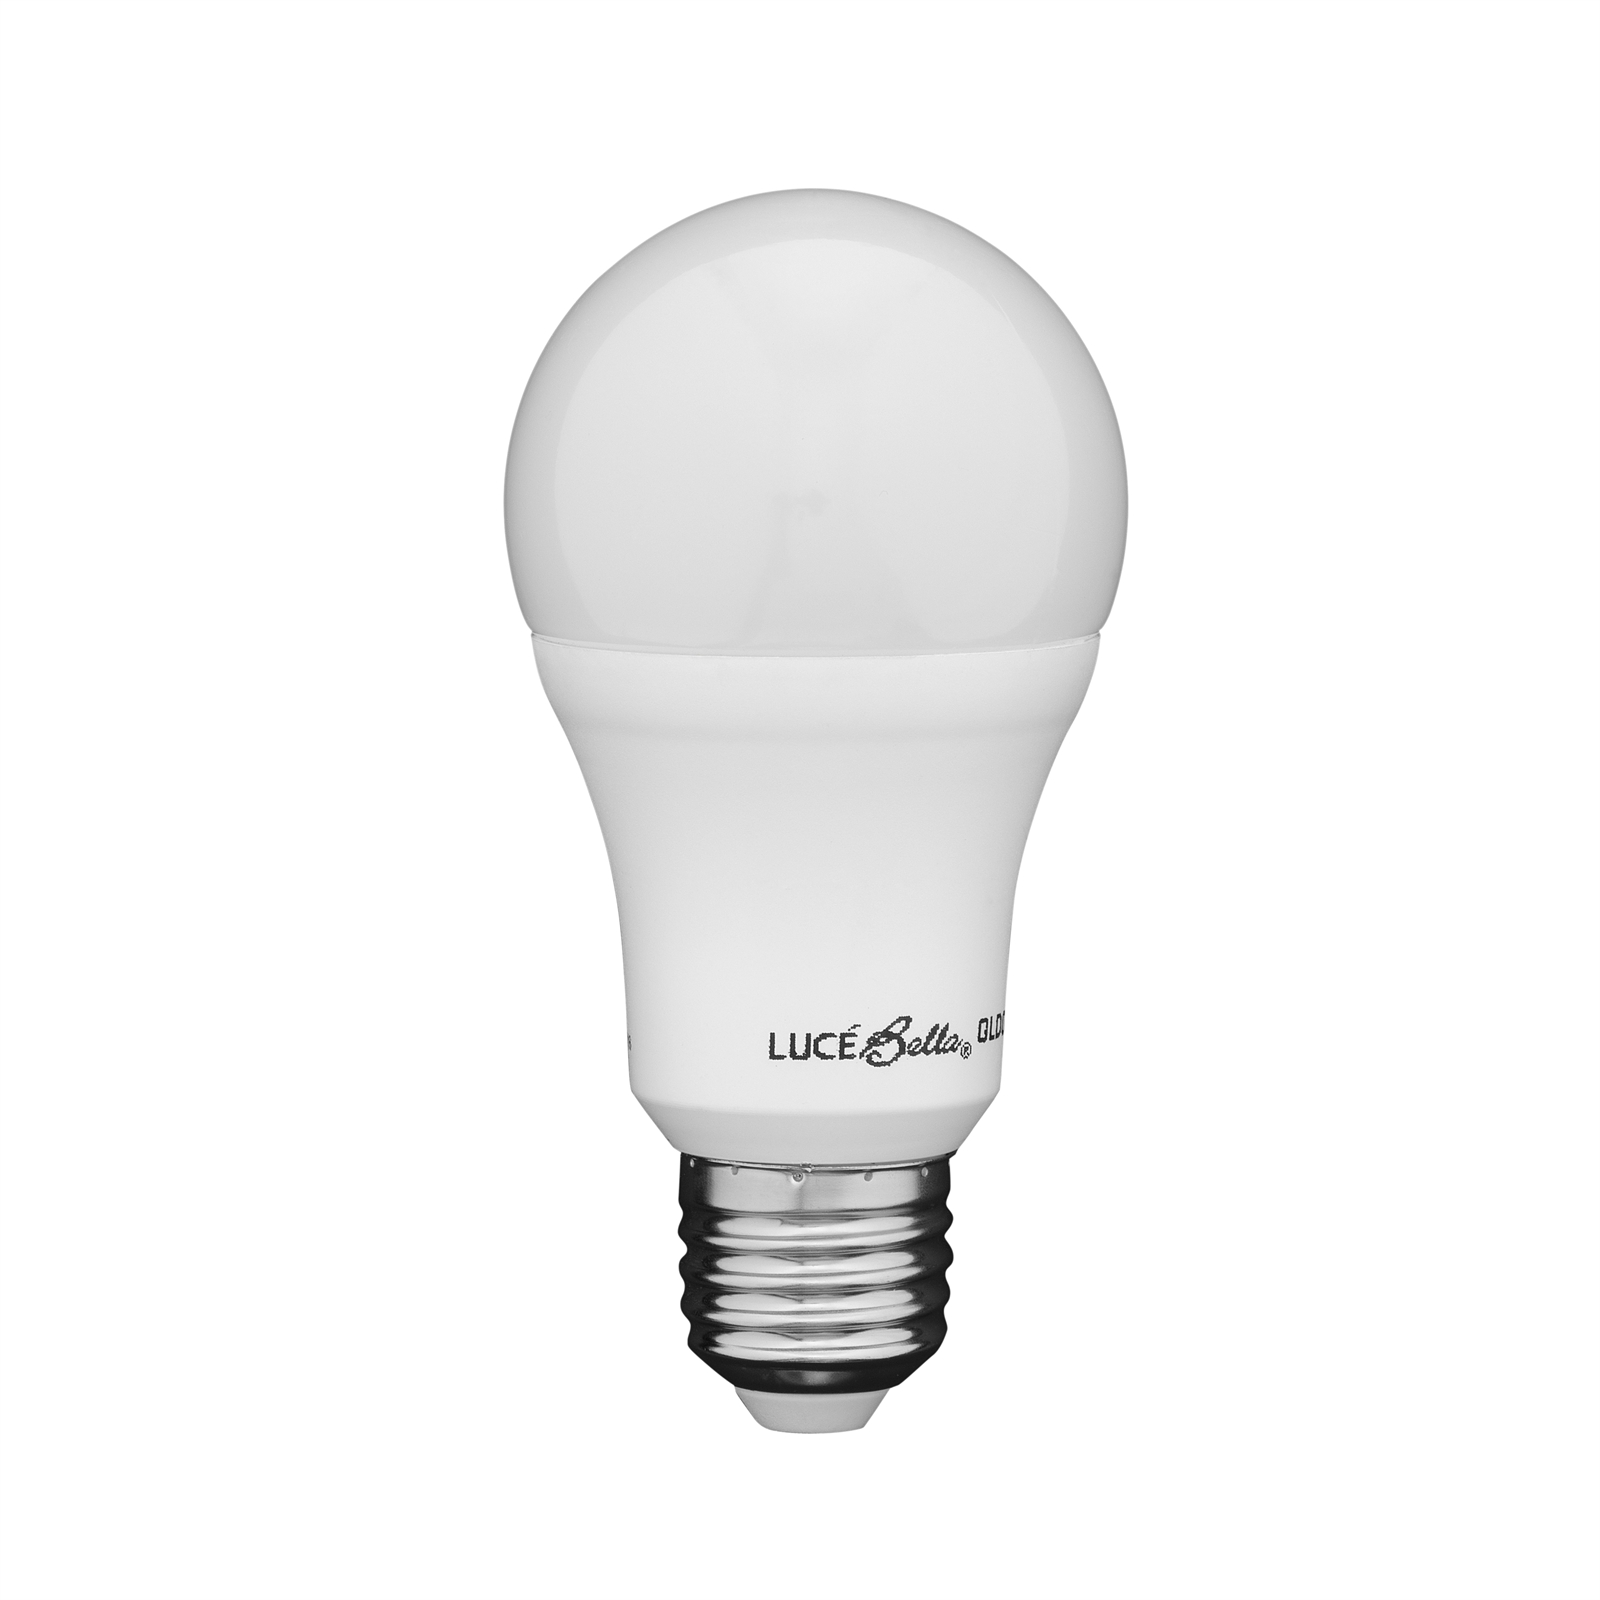 Luce Bella 10W 806lm ES Warm White Dimmable LED Globe - 2 Pack